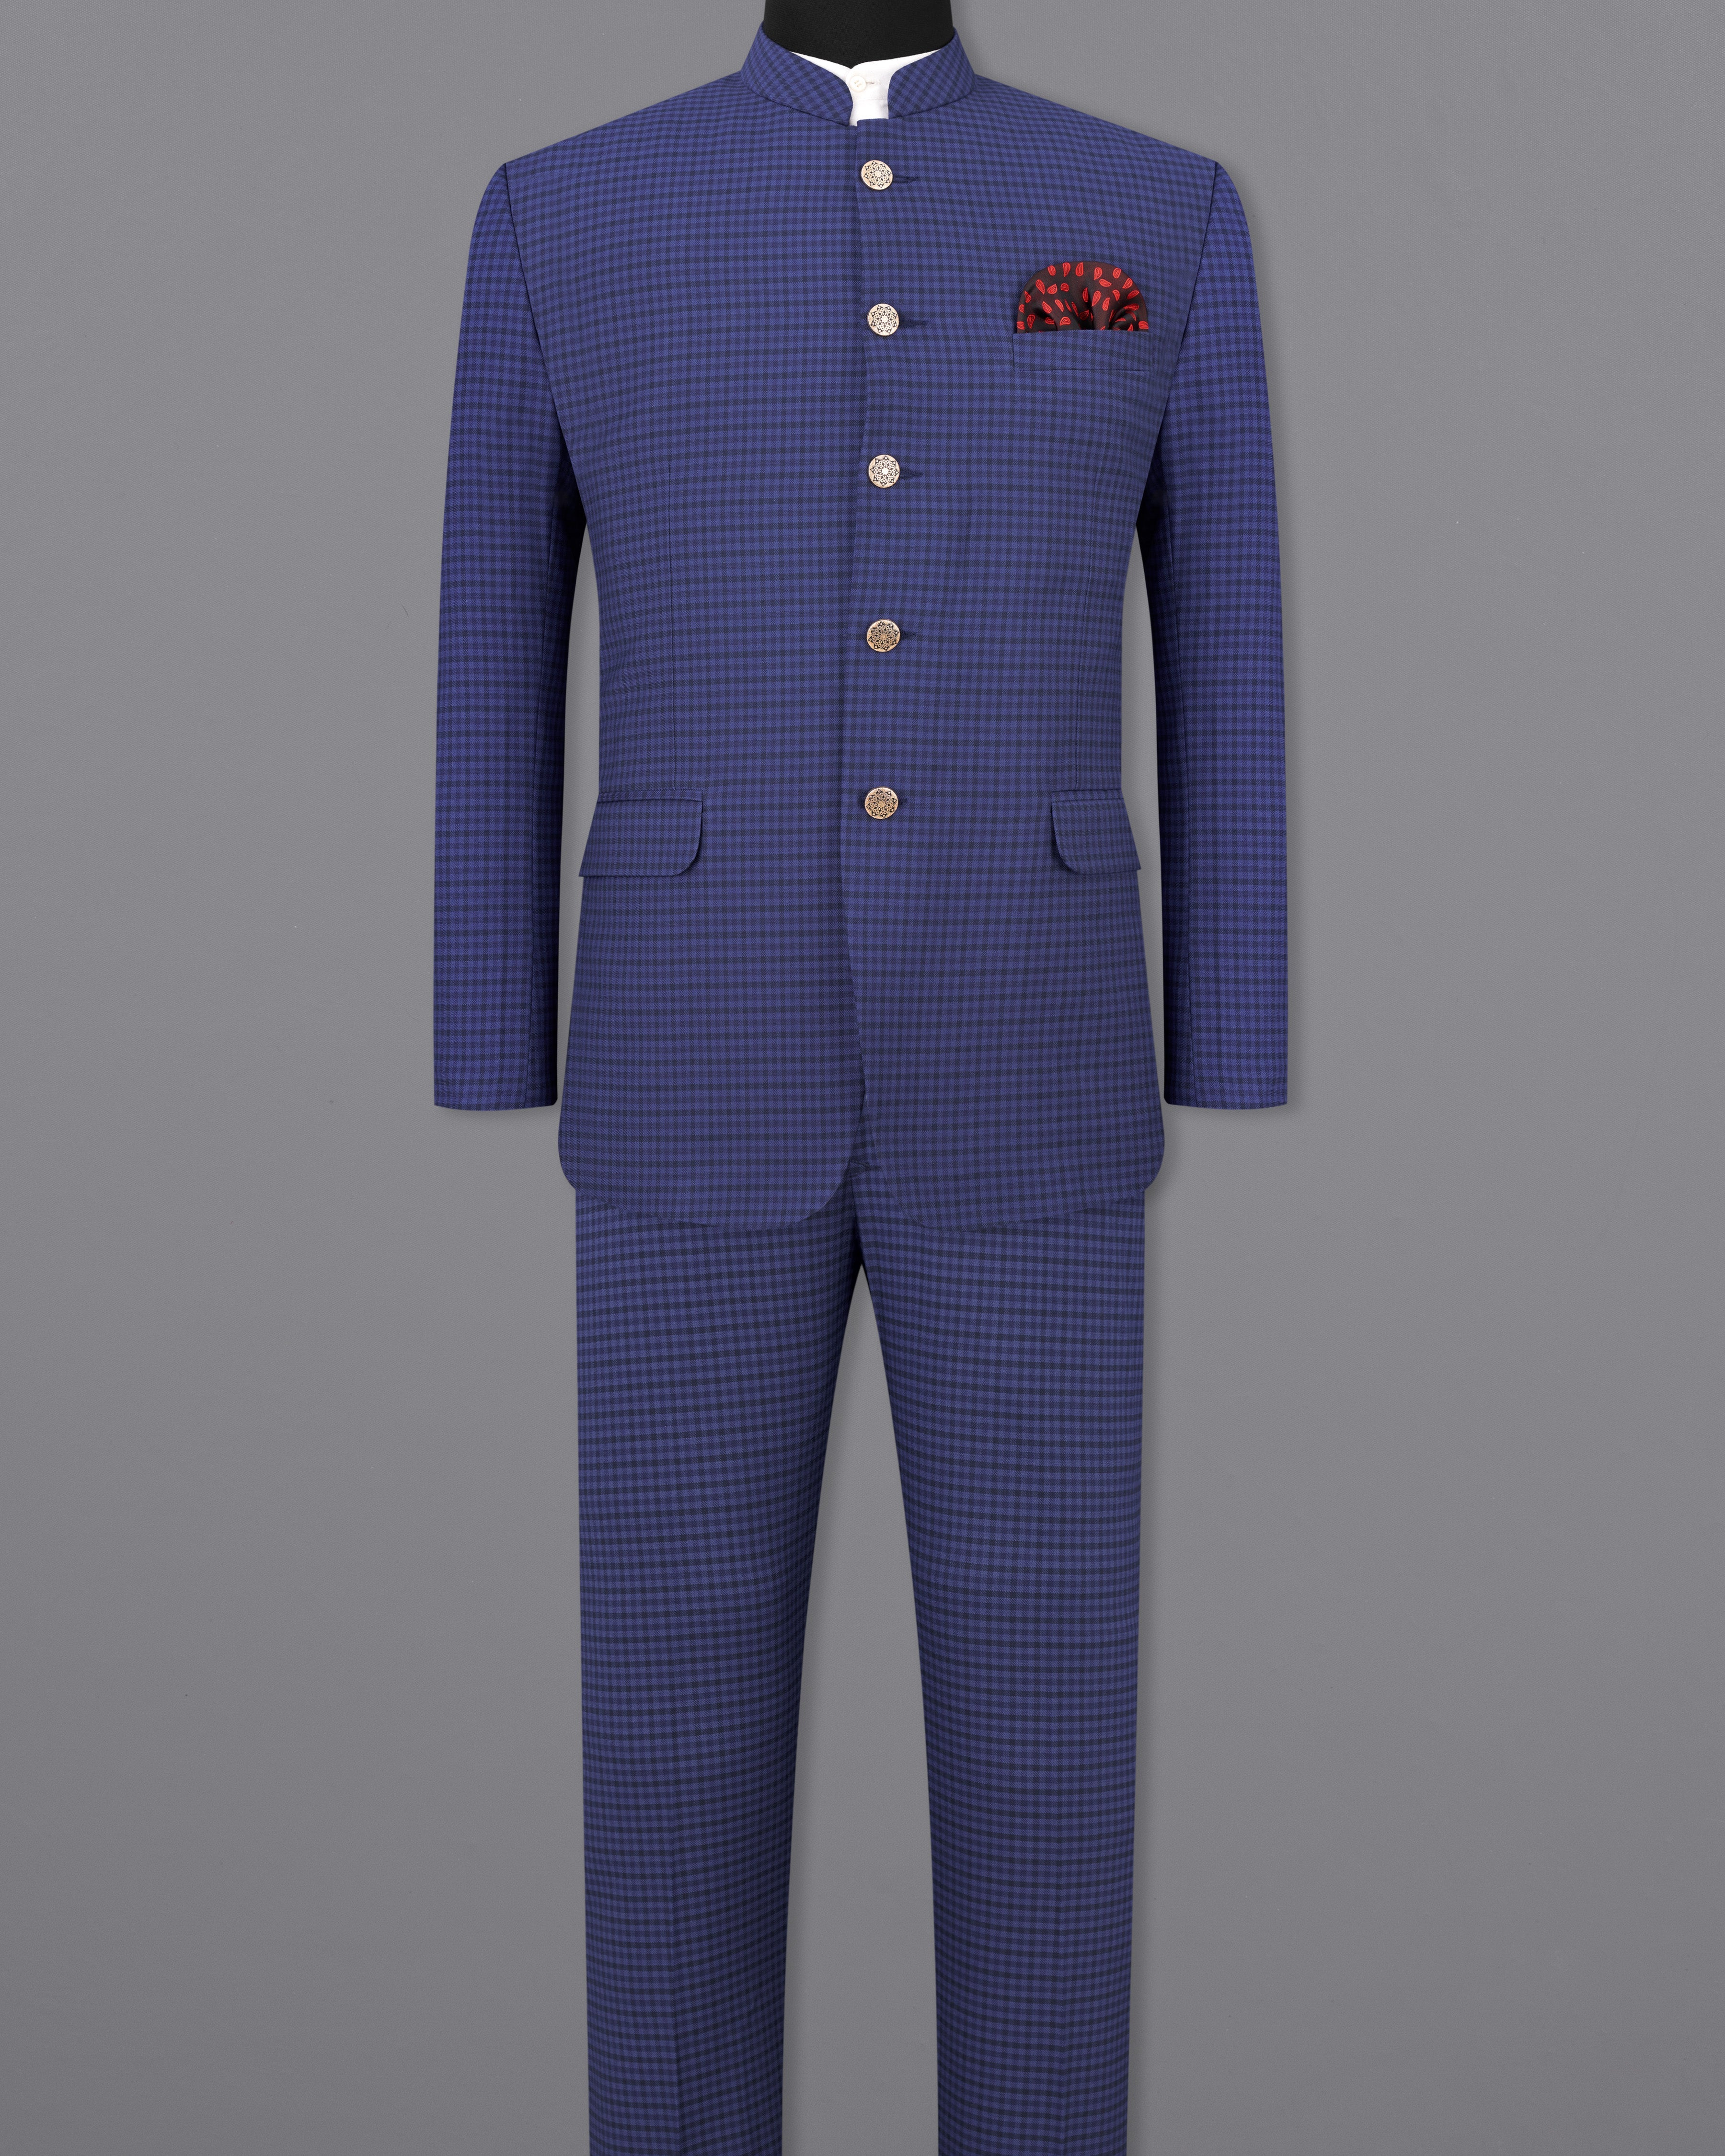 Victoria Blue Gingham Checkered Bandhgala Suit ST2496-BG-36, ST2496-BG-38, ST2496-BG-40, ST2496-BG-42, ST2496-BG-44, ST2496-BG-46, ST2496-BG-48, ST2496-BG-50, ST2496-BG-52, ST2496-BG-54, ST2496-BG-56, ST2496-BG-58, ST2496-BG-63